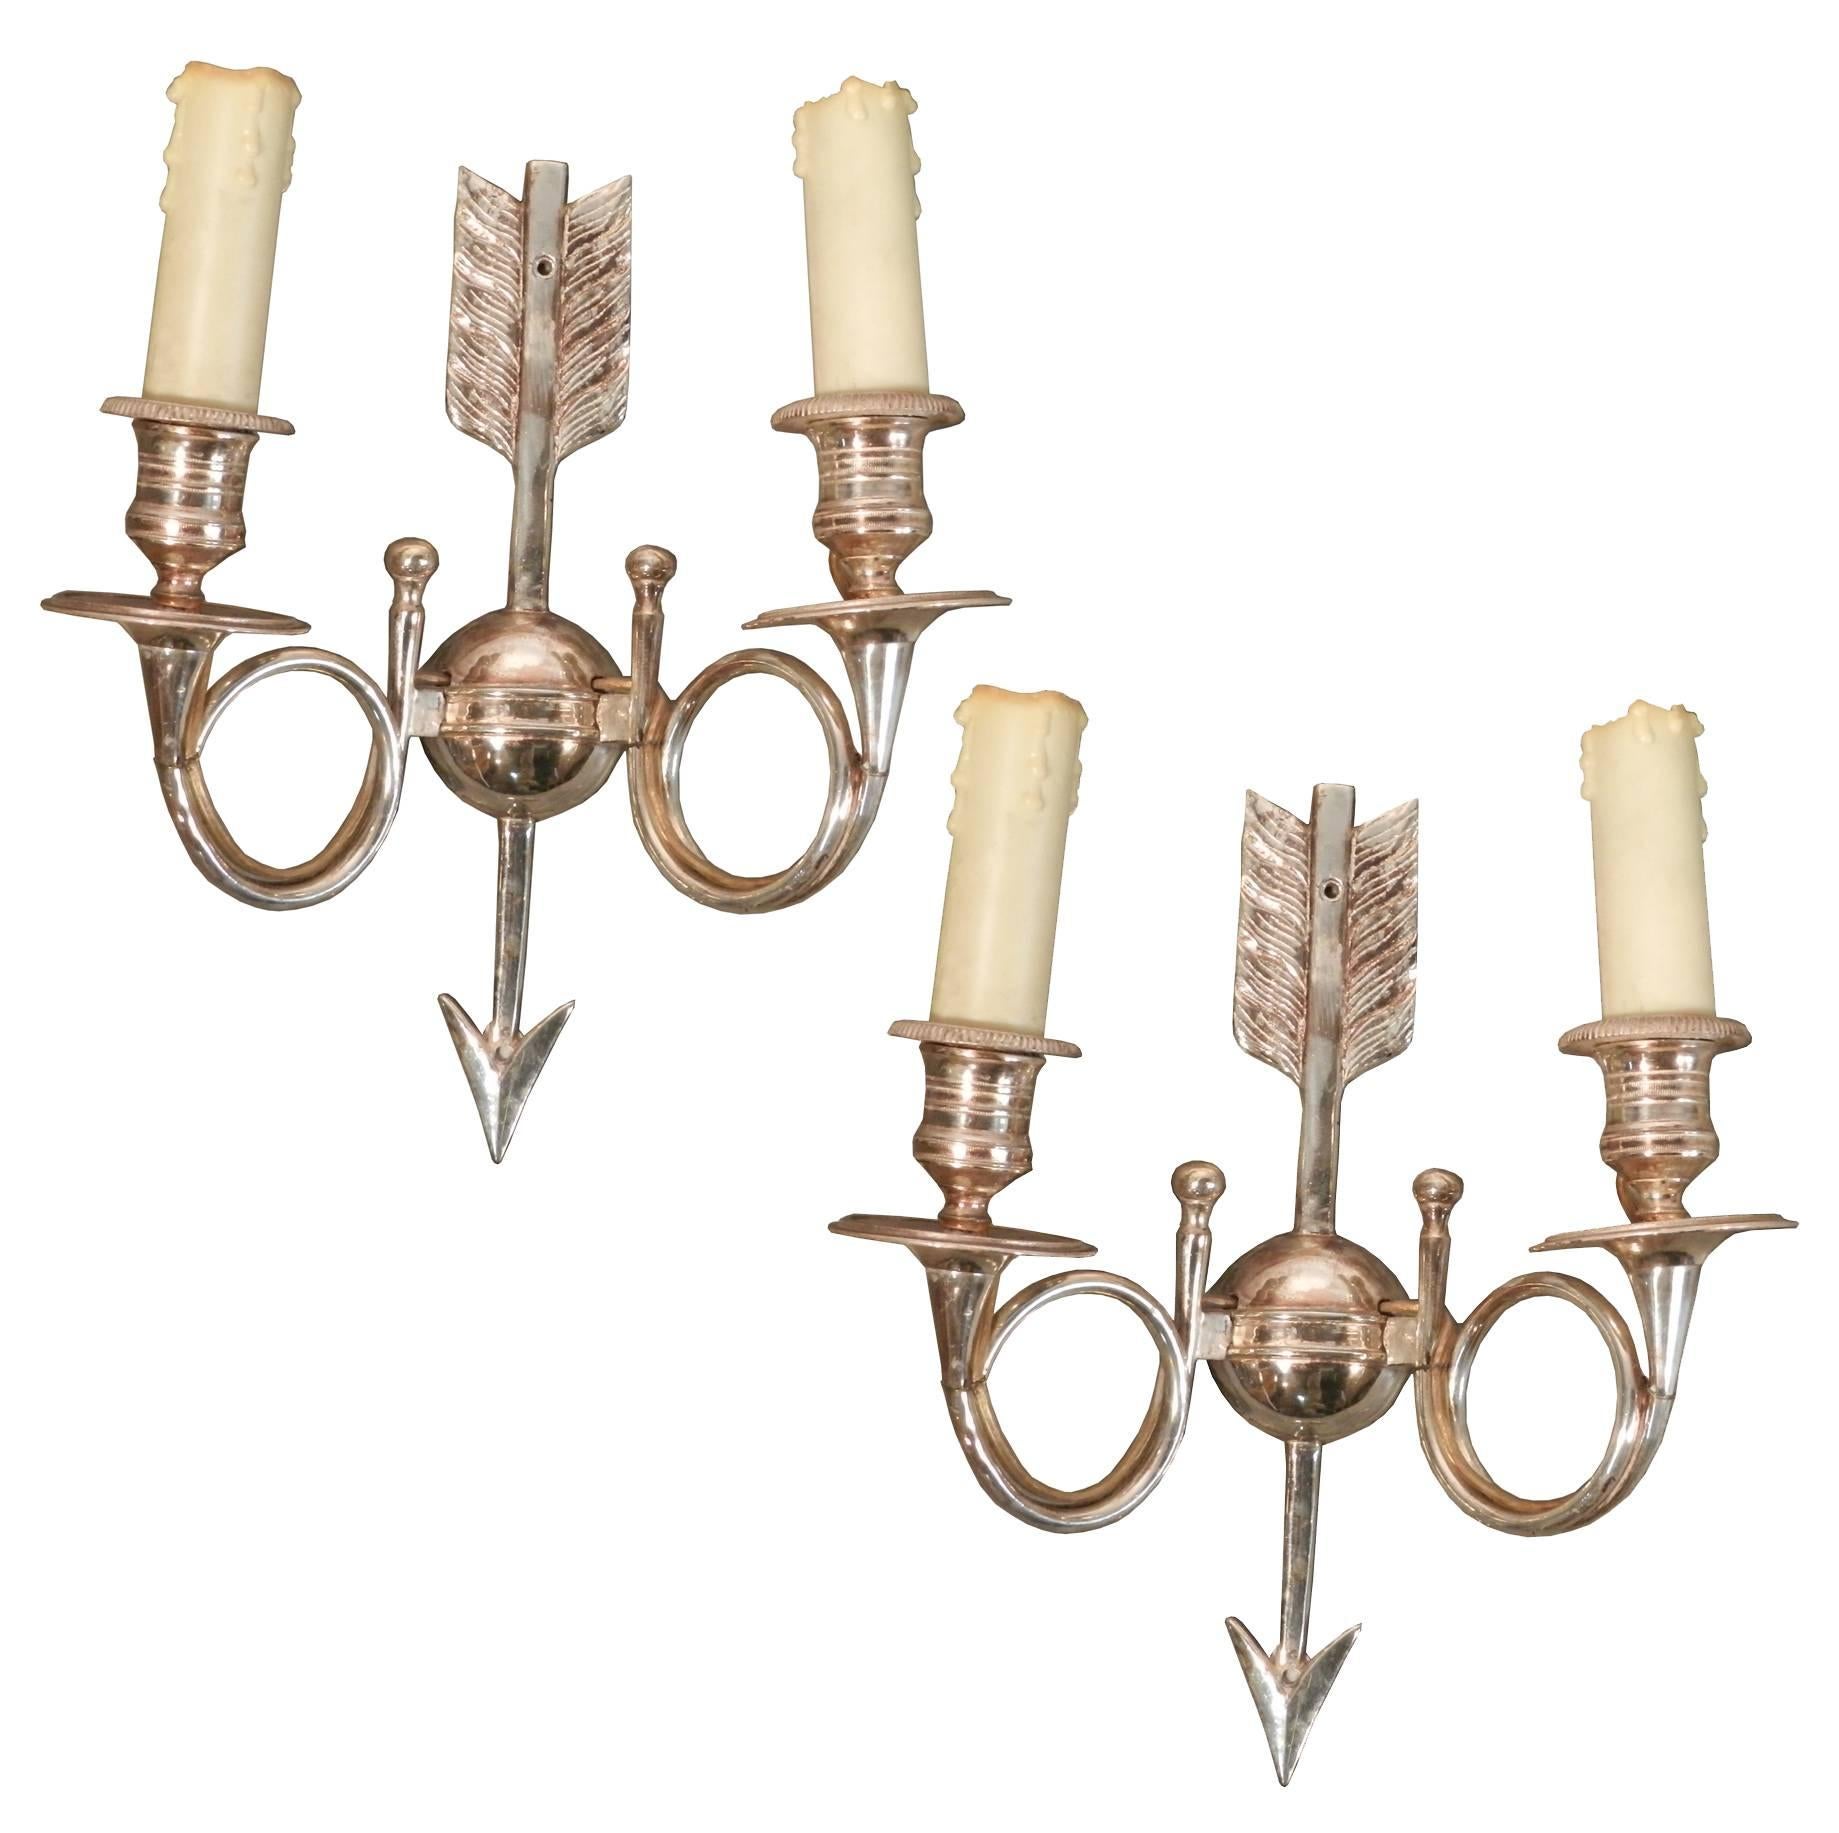 Set of six silvered bronze sconces with monogram and number, circa 1960.
Measure: 4 big: 29 x 25 x 12 cm.
2 little 25 x 23 x 10 cm.